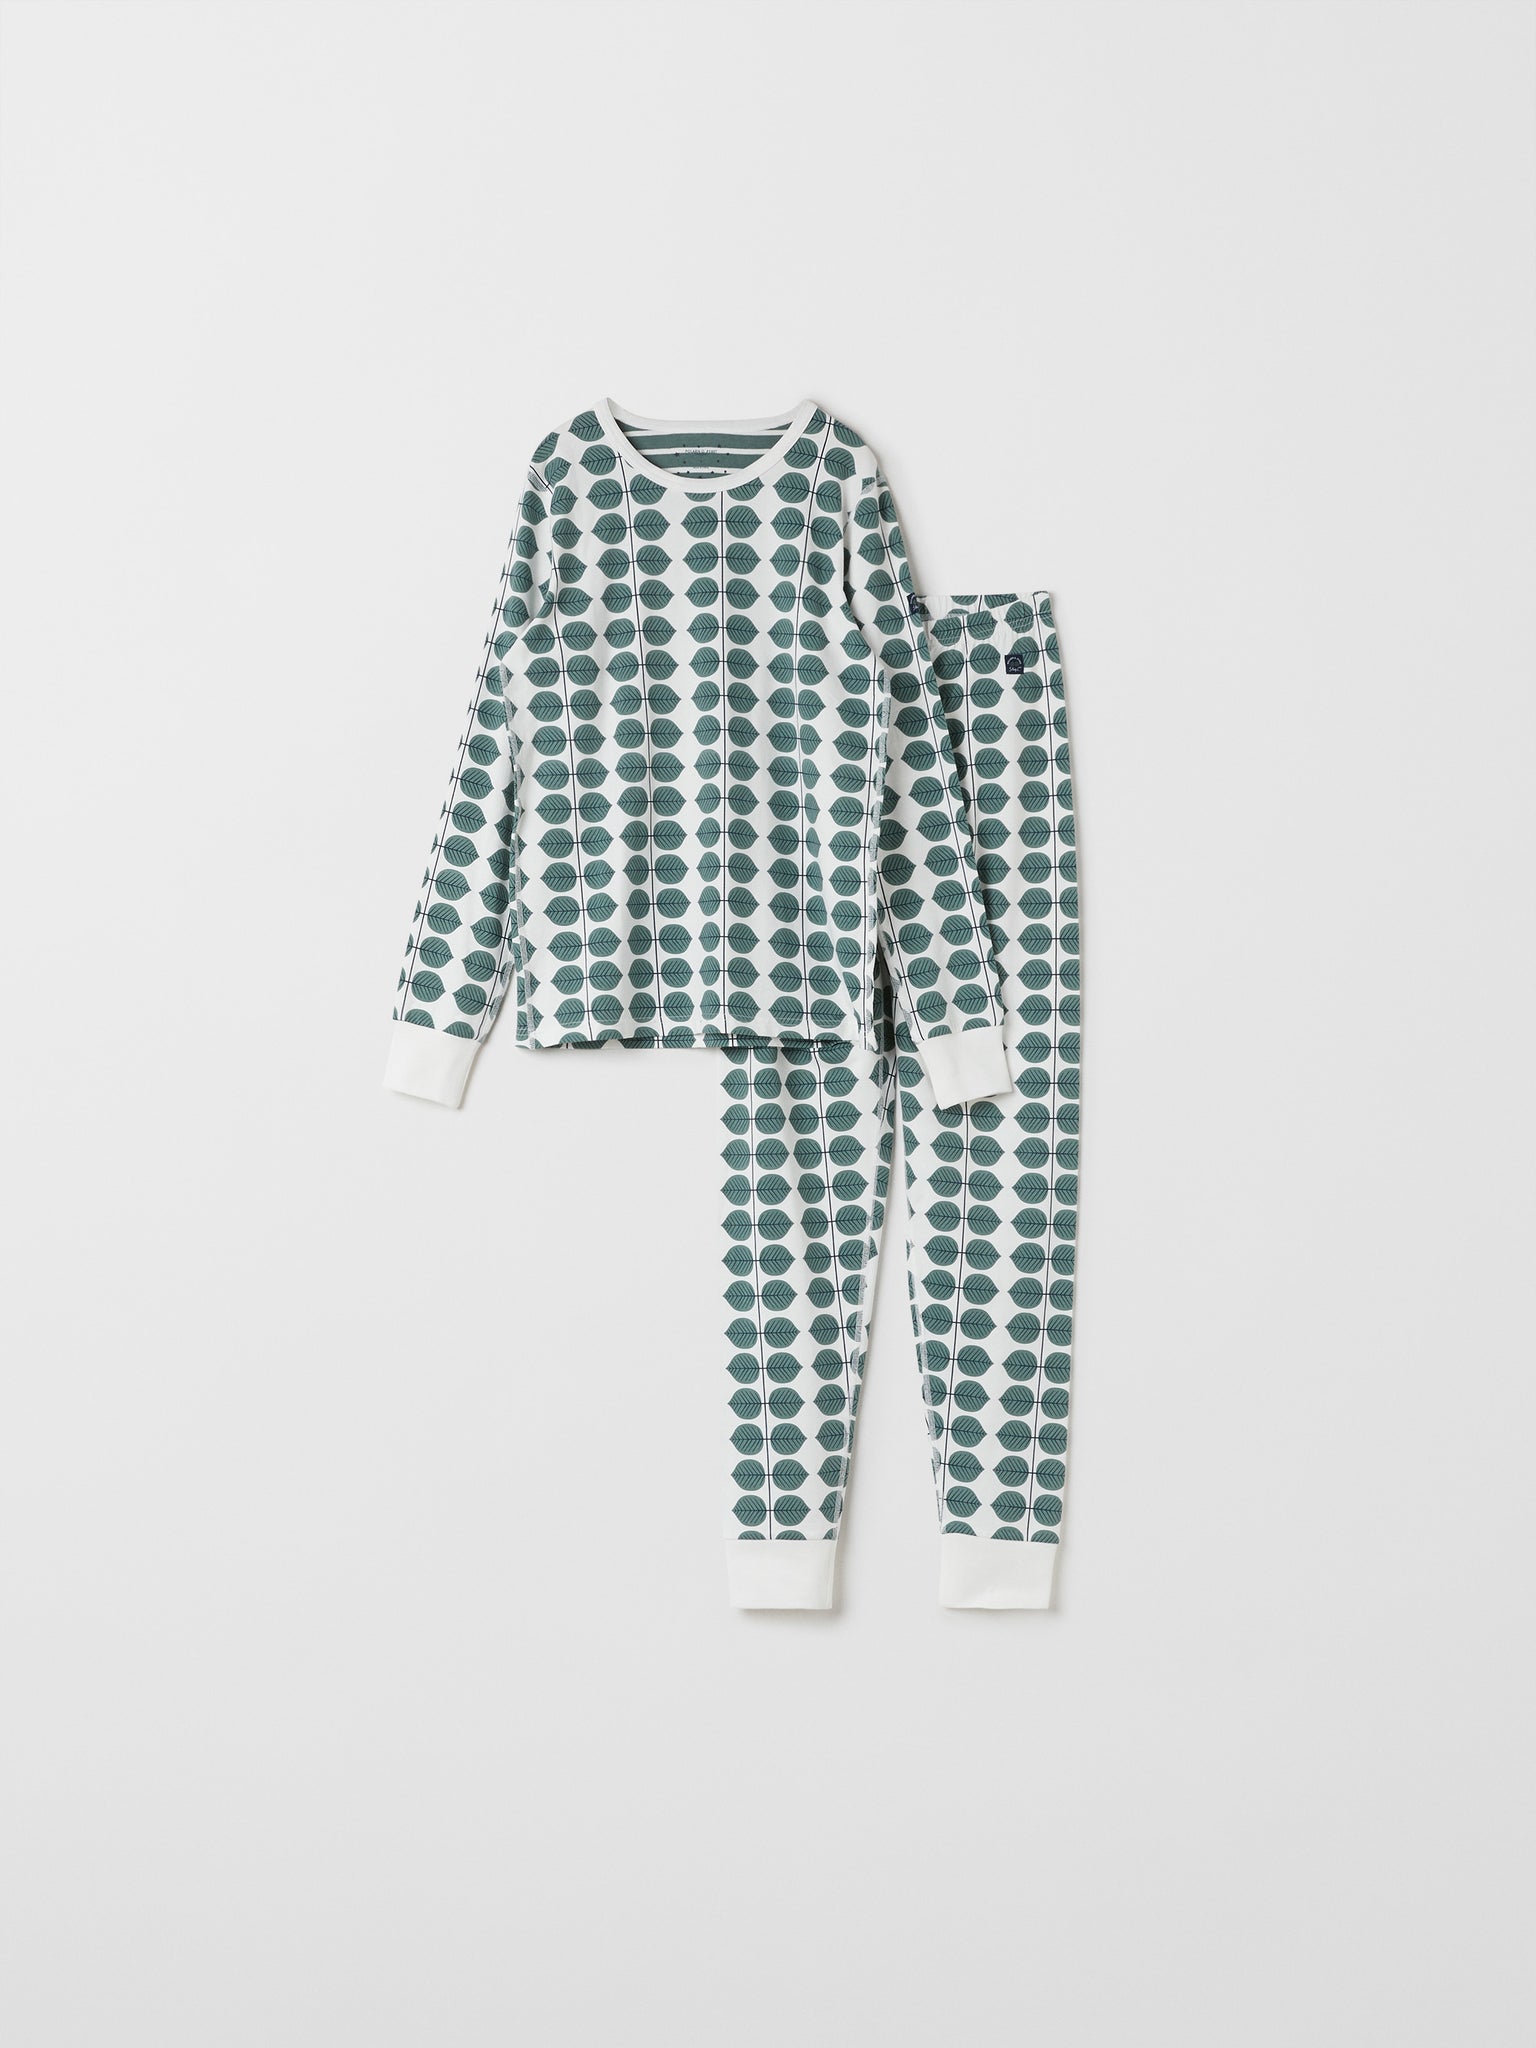 Organic Cotton Scandi Adult Pyjamas from the Polarn O. Pyret adult collection. Ethically produced kids clothing.